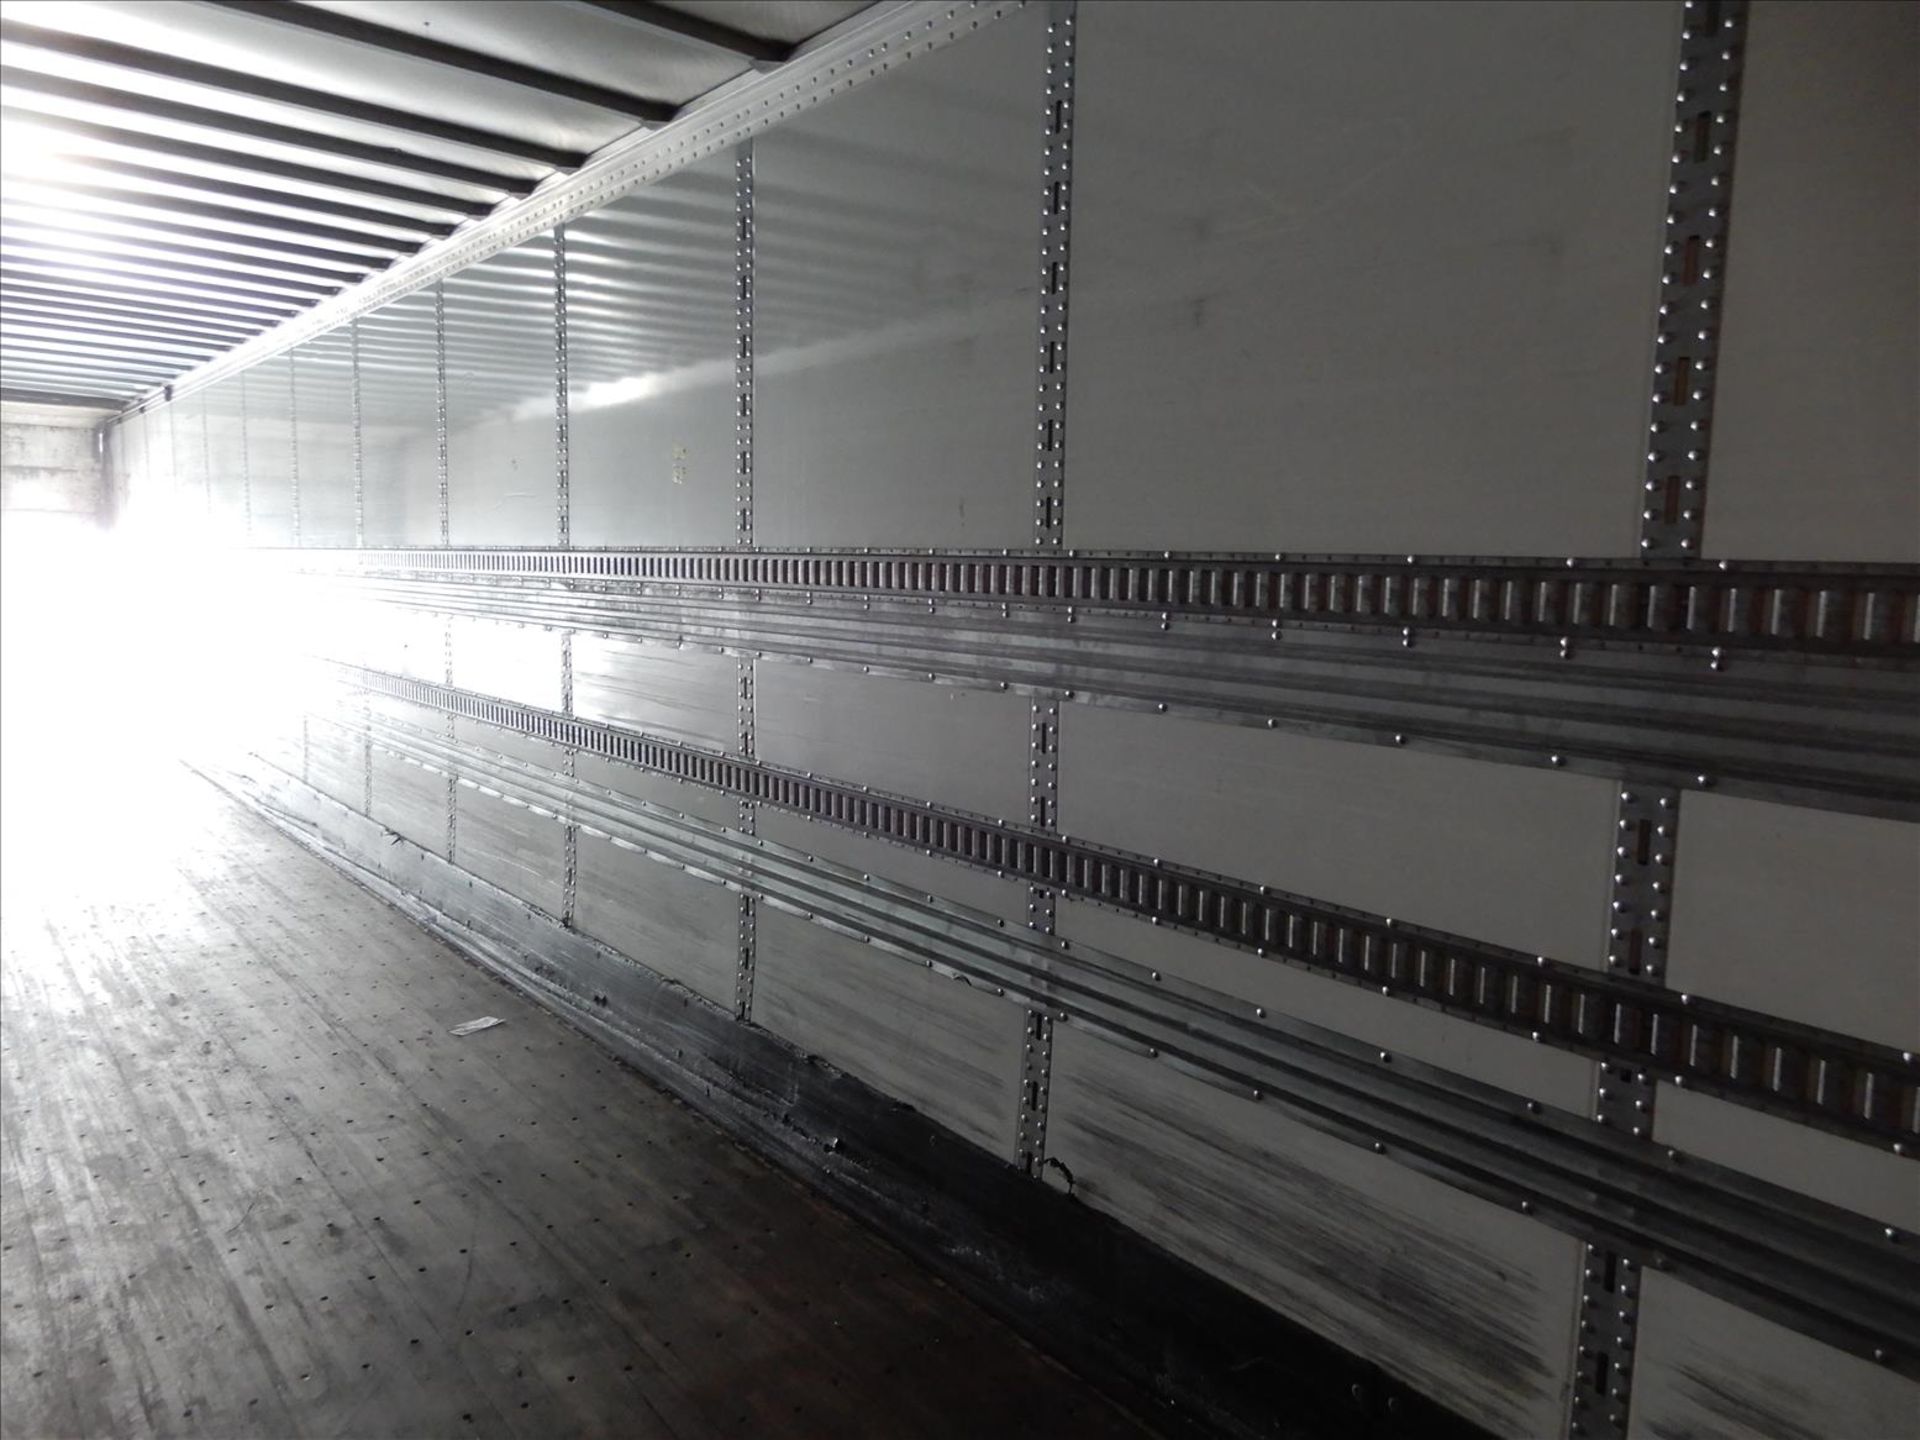 2012 Stoughton Trailer - Located in Indianapolis, IN - Image 17 of 25